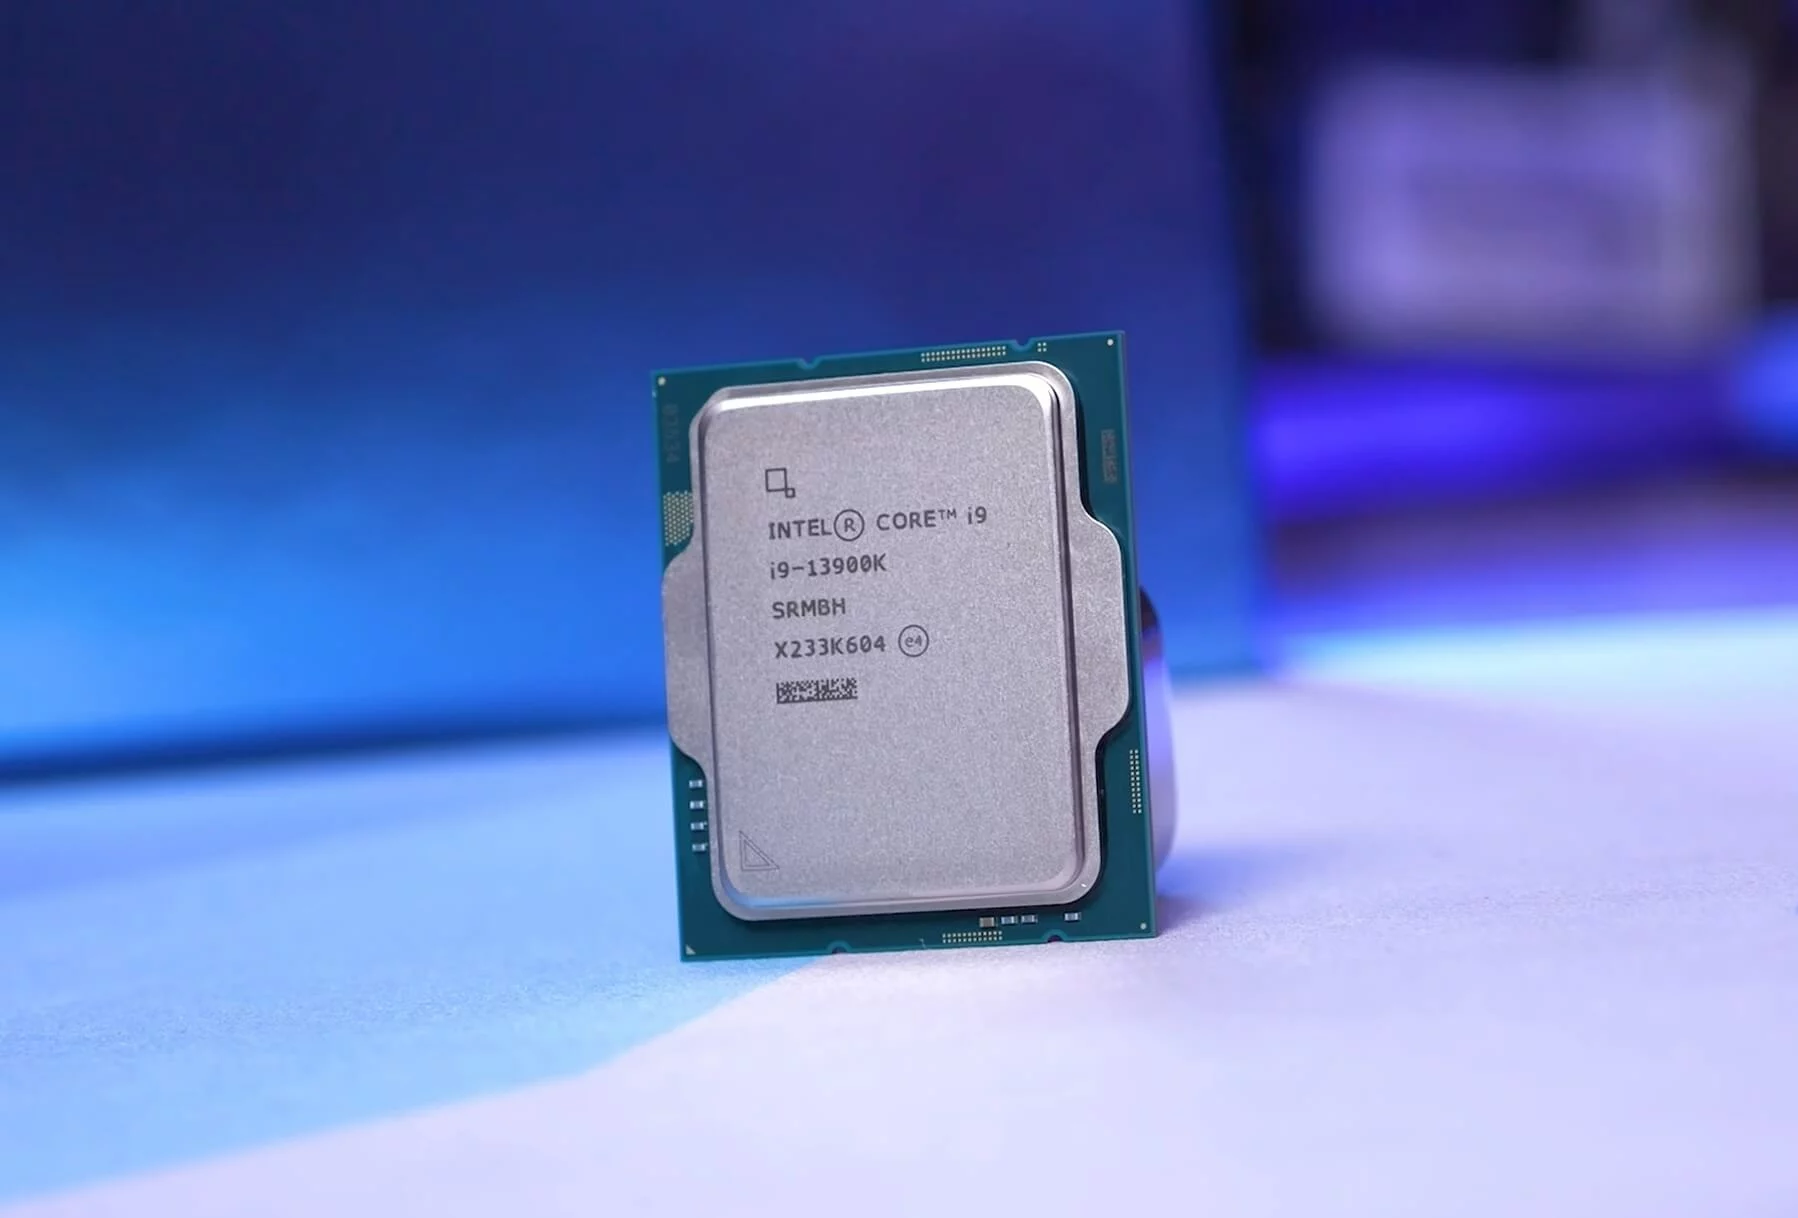 Intel i9-13900K draws nearly 300W and is terribly inefficient. Is it better than 7950X?